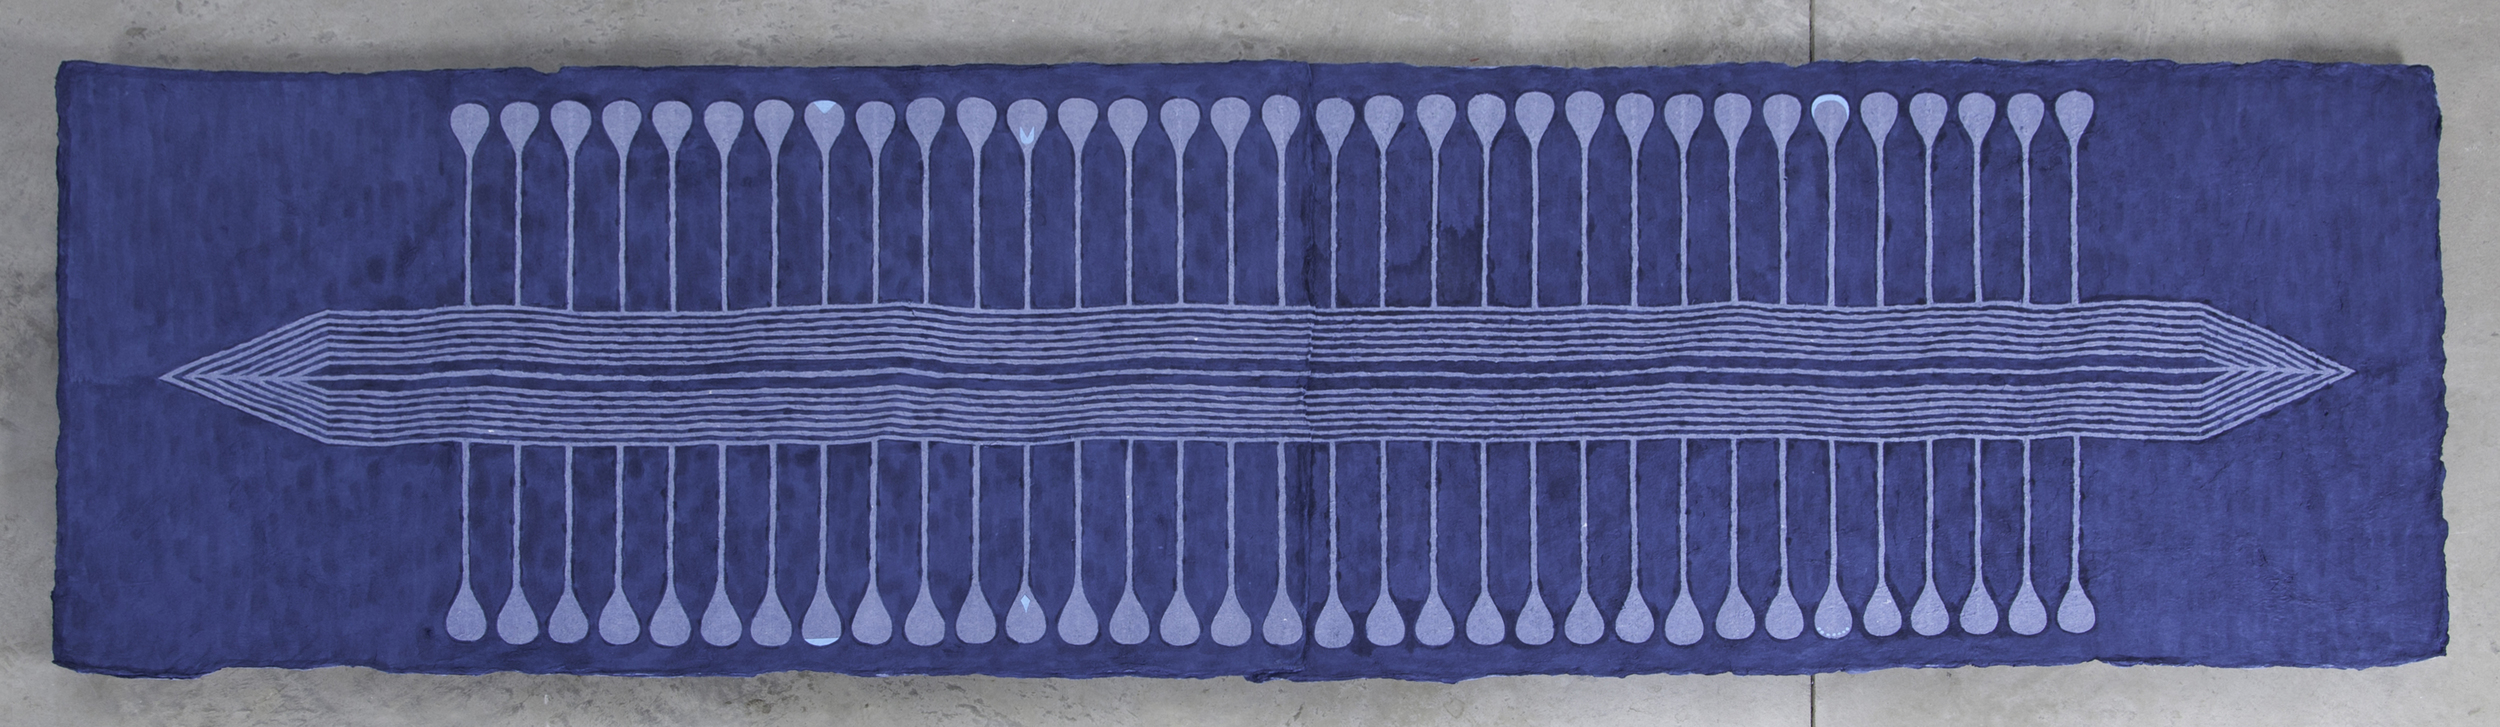   Longboat , 2014  Leather dye and acrylic on handmade paper, 120 x 40 inches 